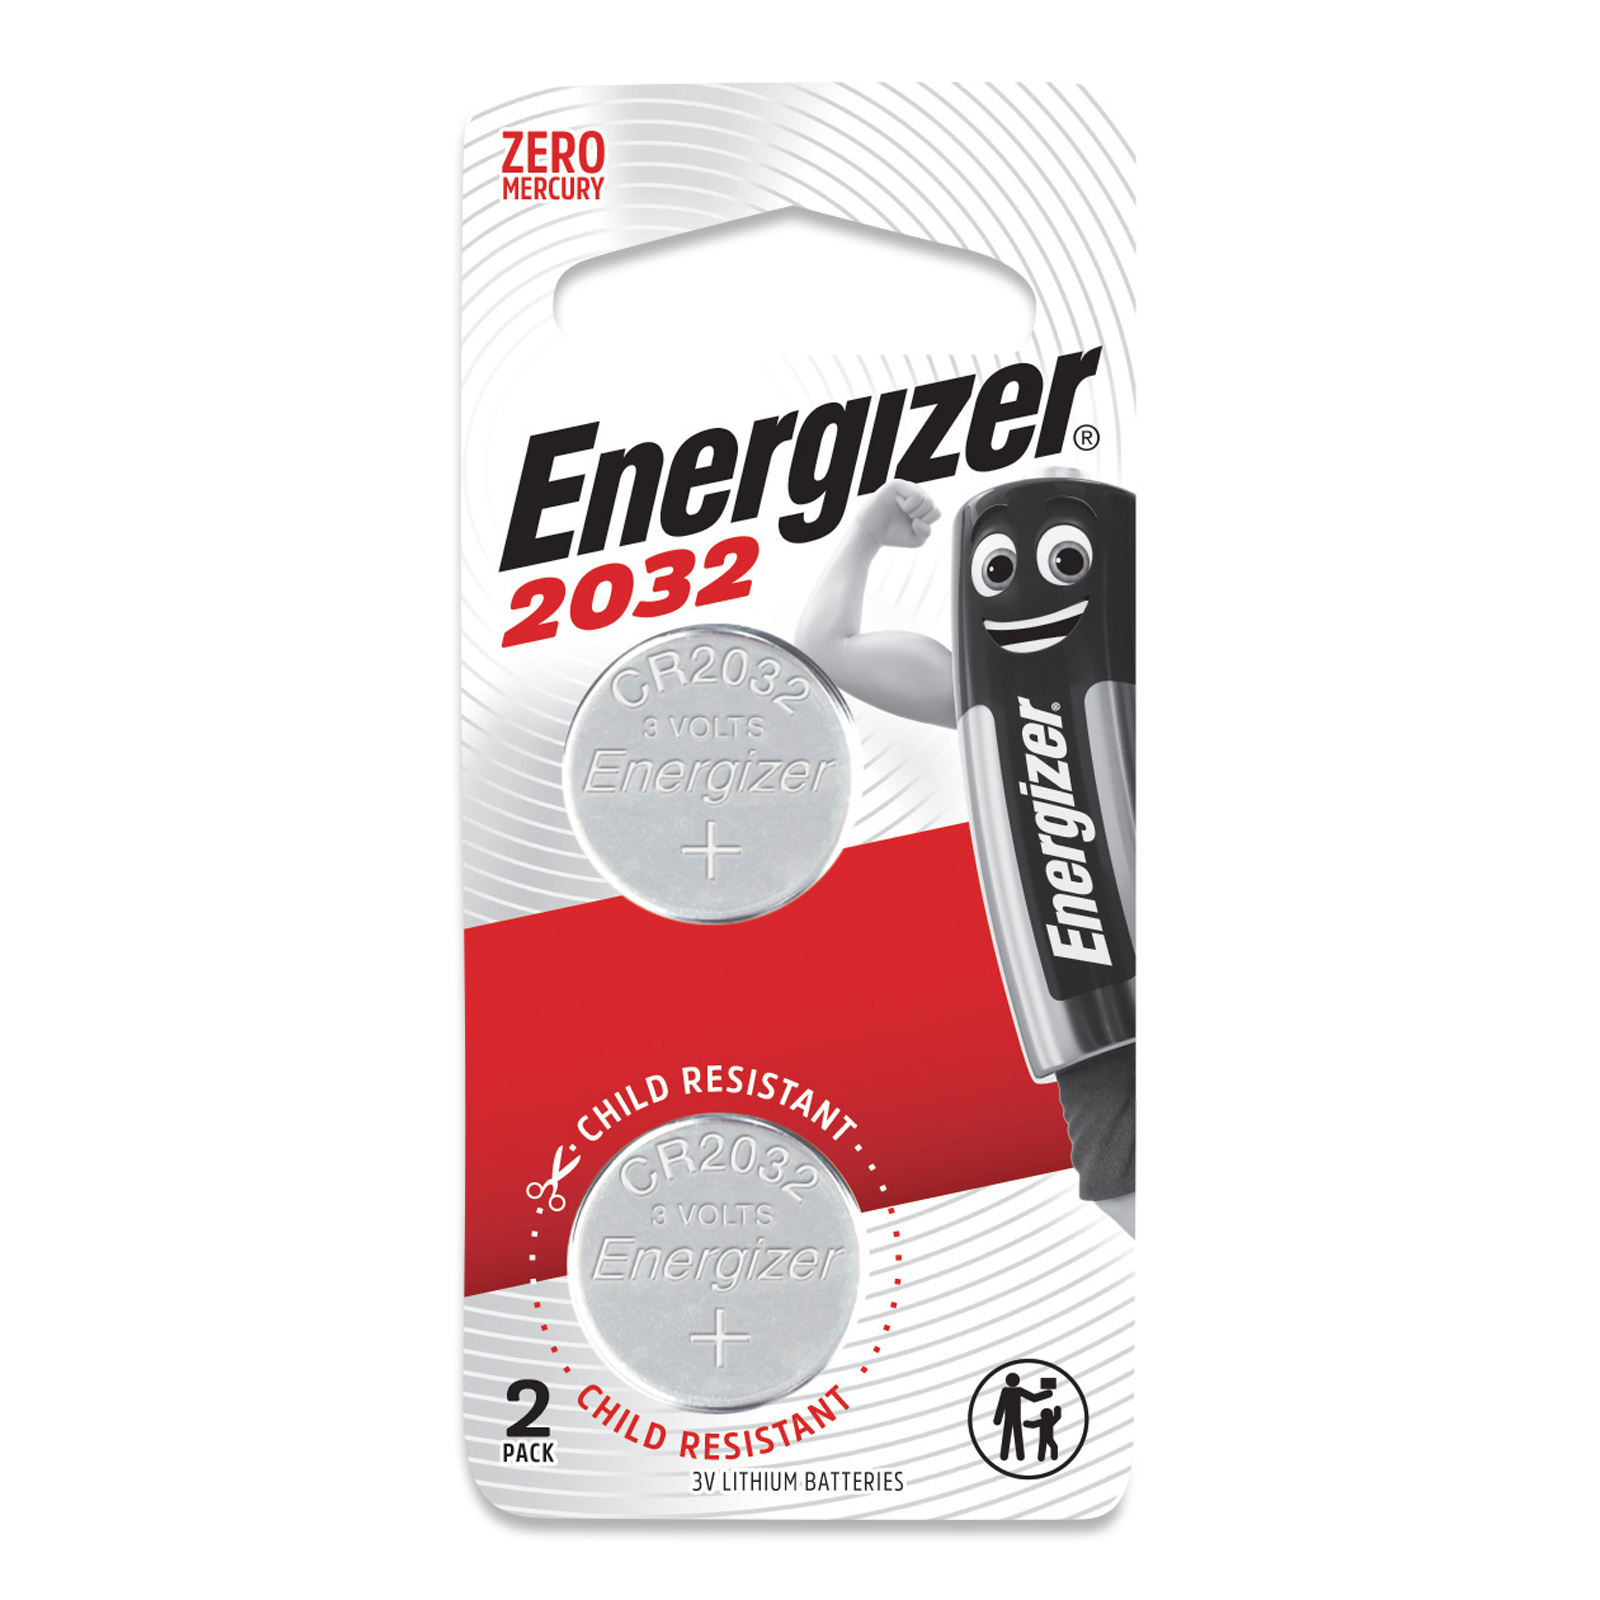 Energizer 3V Lithium Coin Battery CR2032, 2PC/Card